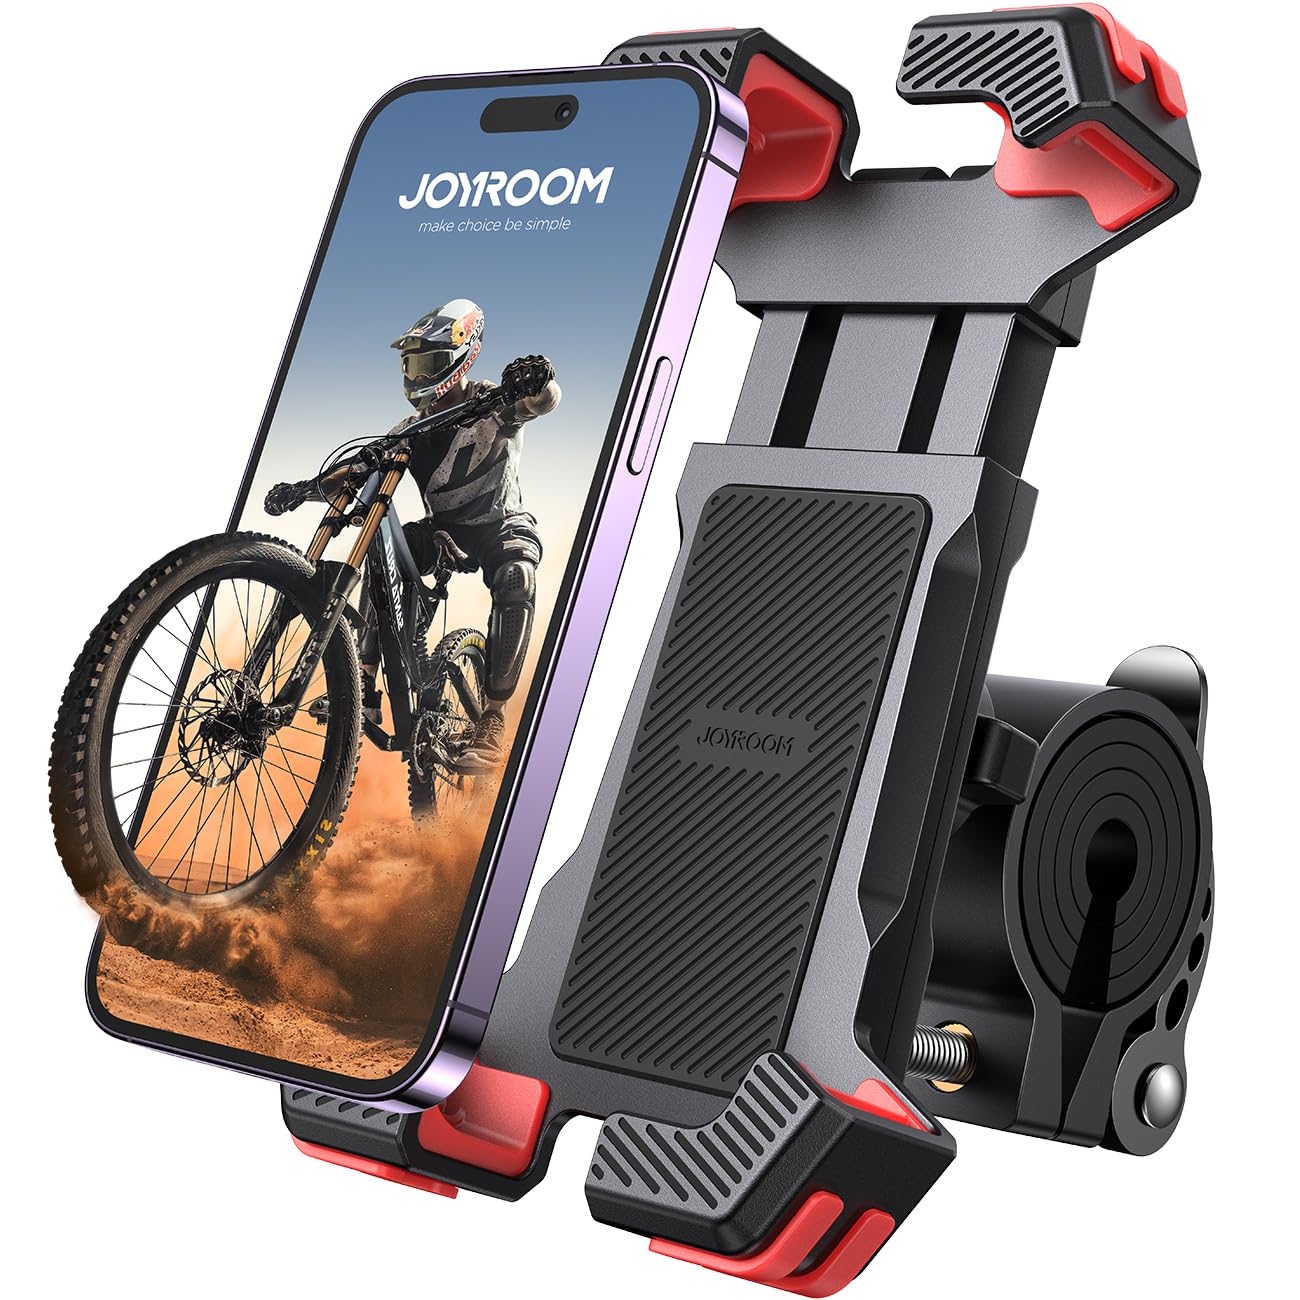 JOYROOM Bike Phone Mount, [1S Locks Phones] Motorcycle Phone Mount with Quick Lock, and Anti-Slip Handlebar Clamp for Bicycle Scooter ATV/UTV, Fit for iPhone 14/13/12 Pro Max and All Phones